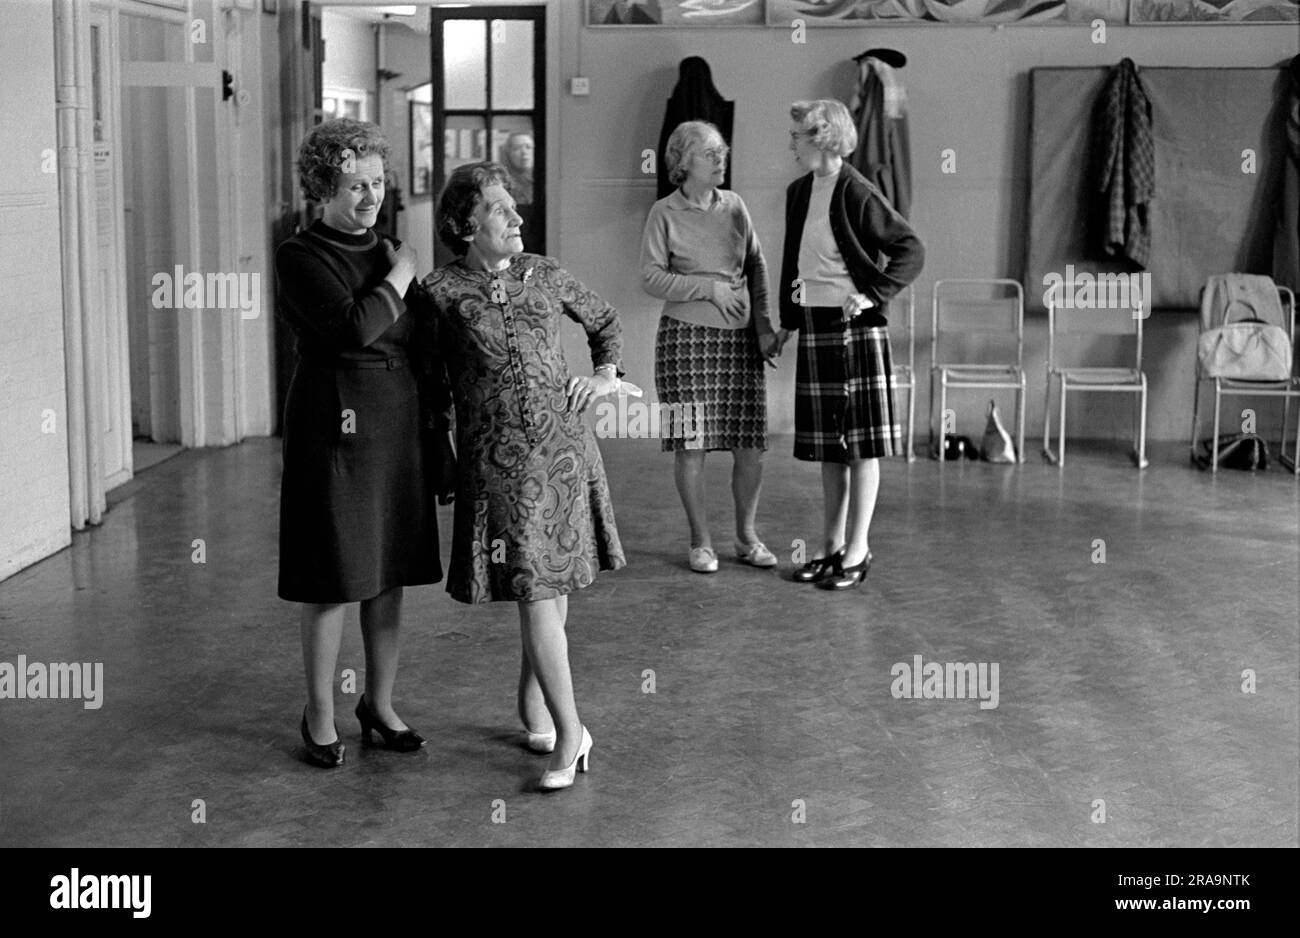 Darby and Joan Club. A blind and partially sighted afternoon dance class for senior citizens at the Battersea Institute. Battersea, London, England circa 1970. 1970s UK HOMER SYKES Stock Photo